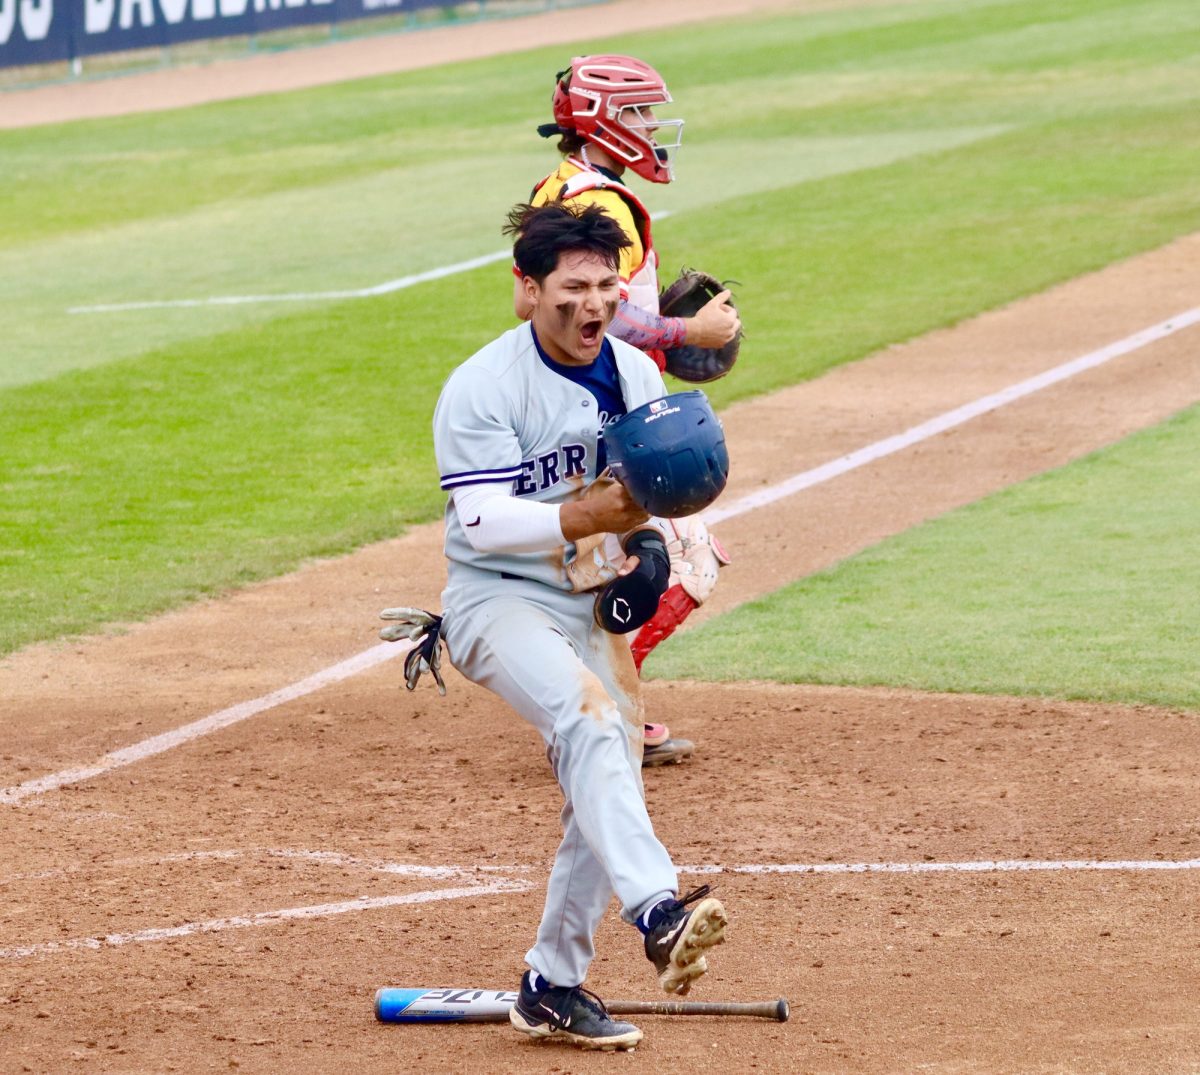 Outfielder, Nico Briones yelling and pumped after scoring at home from second base. Photo credit: Joel Carpio